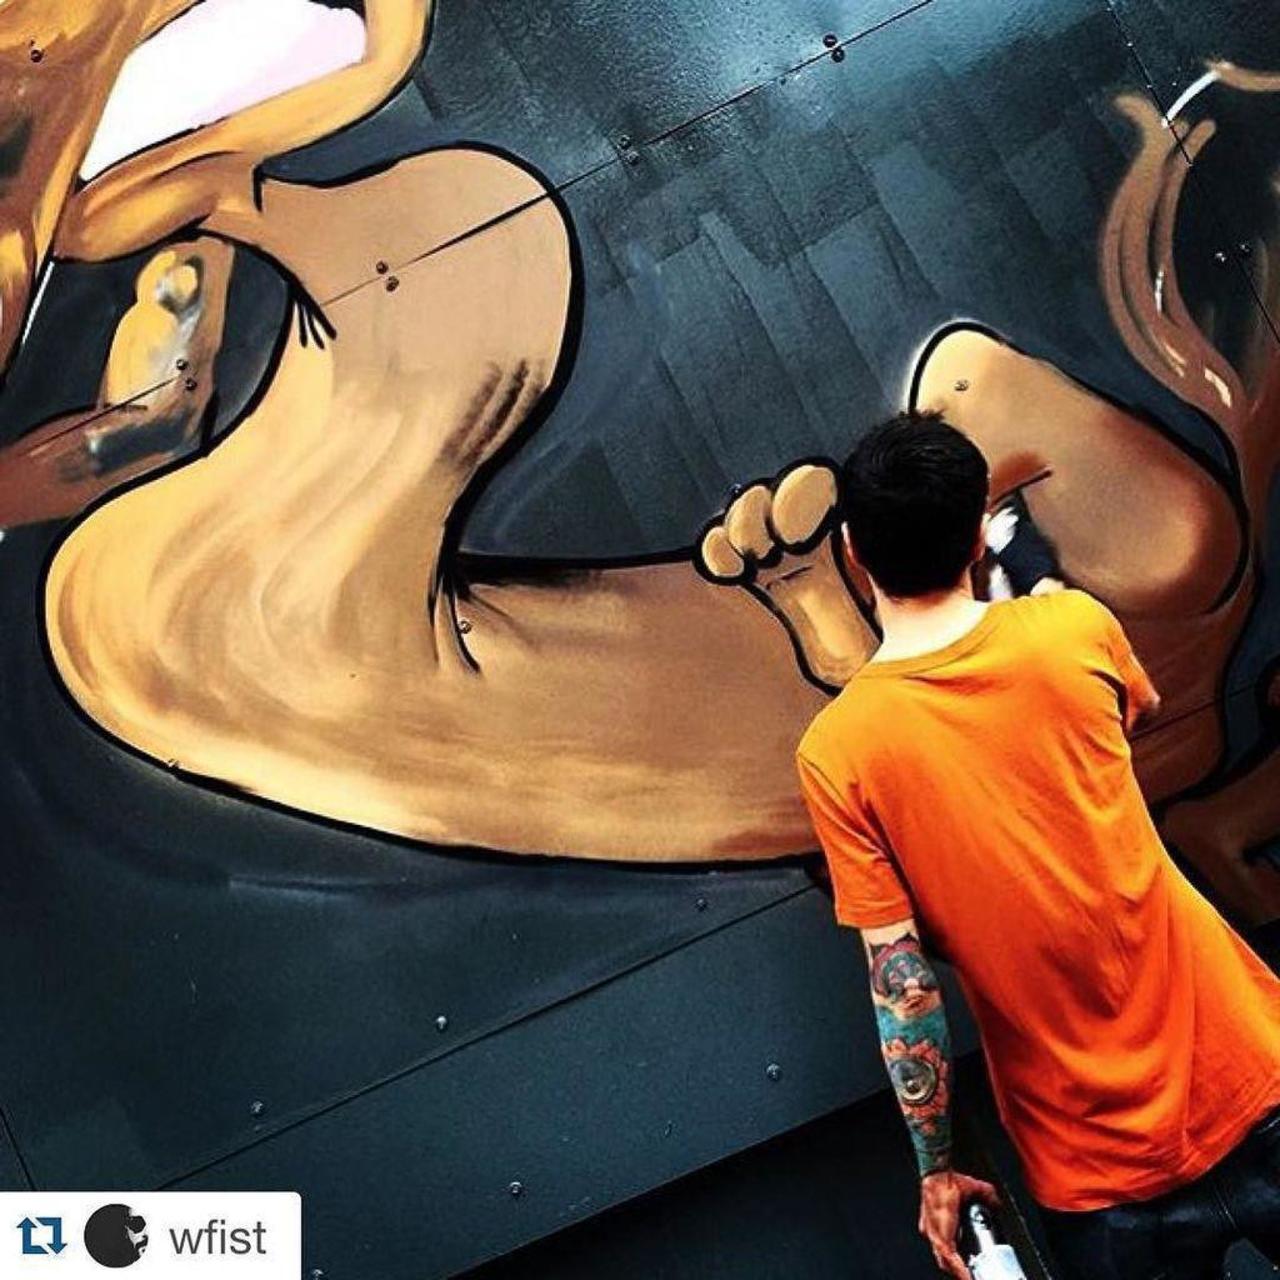 good vibes only  @wfist 
#Repost @wfist with @repostapp.
・・・
busted weasel in process  |  #graffiti #streetart #i… http://t.co/c4s0T8YCjm